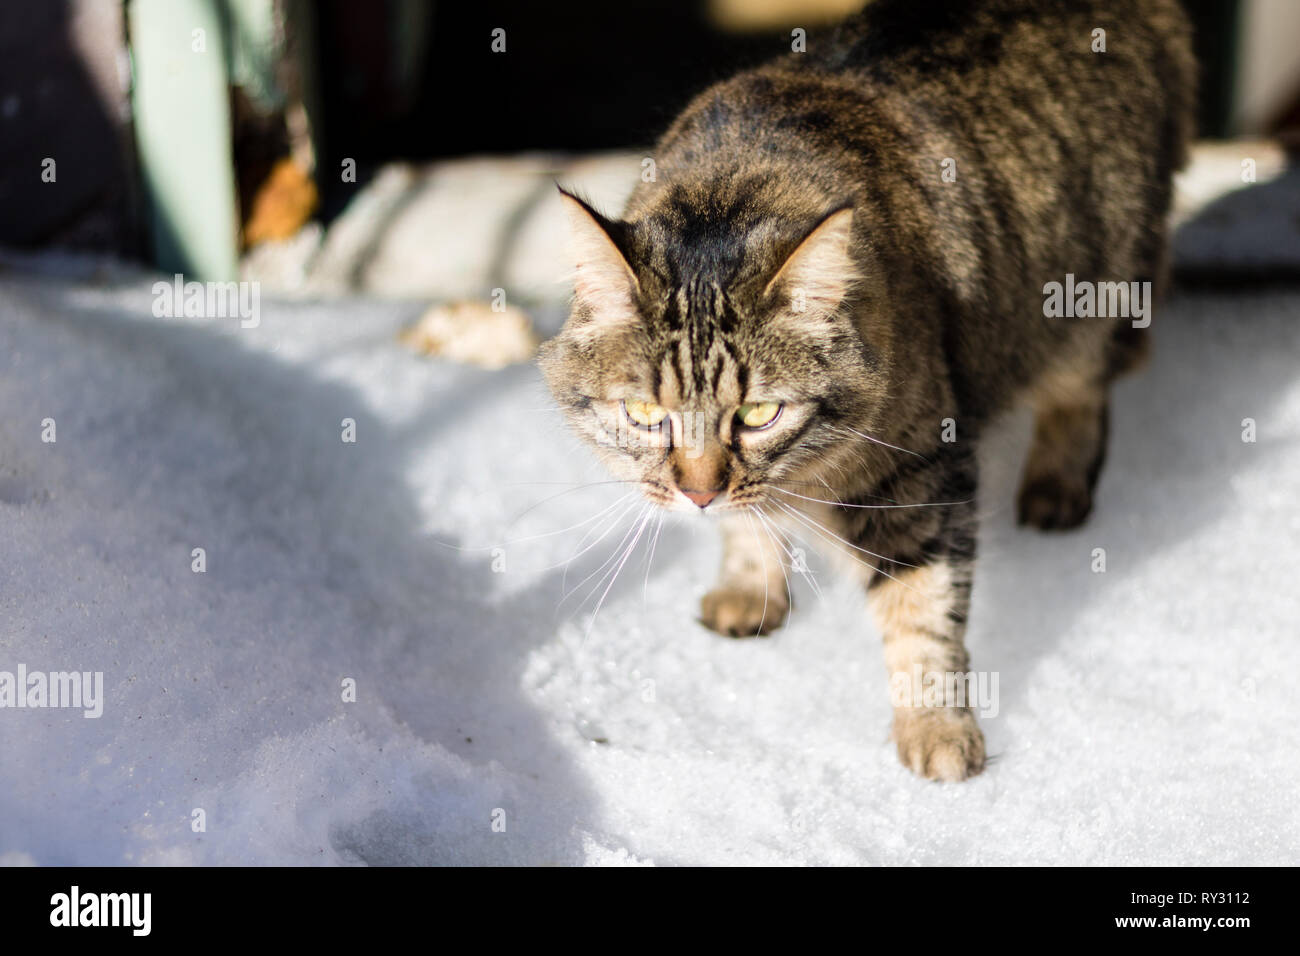 A scared cat is trying to walk on snow. Cat is walking on snow. A cat is afraid of snow. Stock Photo